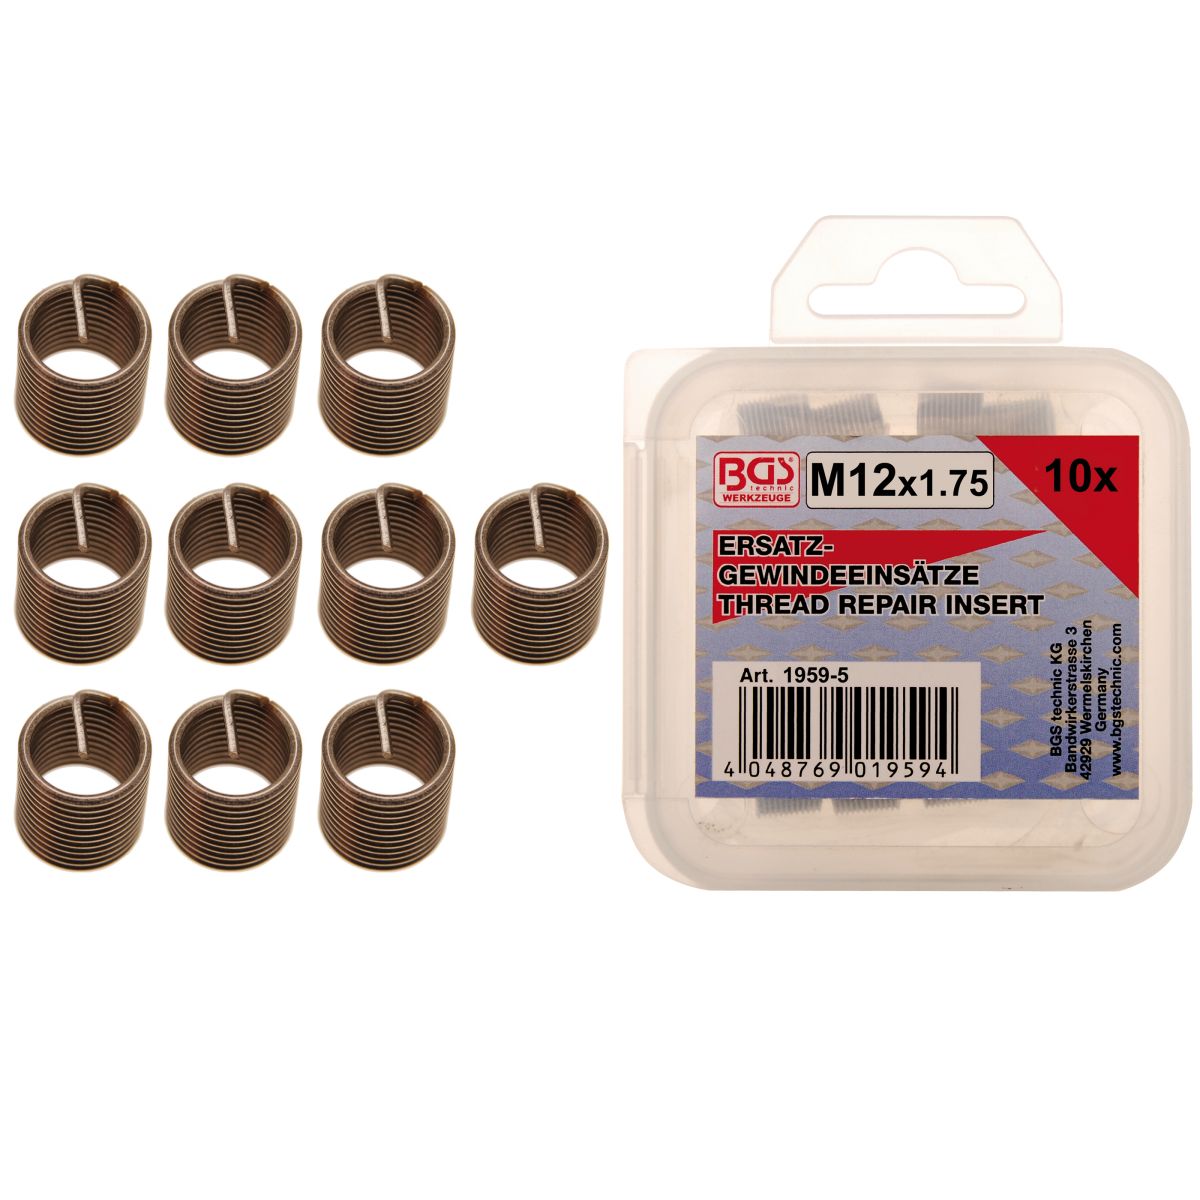 Replacement Thread Inserts | M12 x 1.75 mm | 10 pcs.